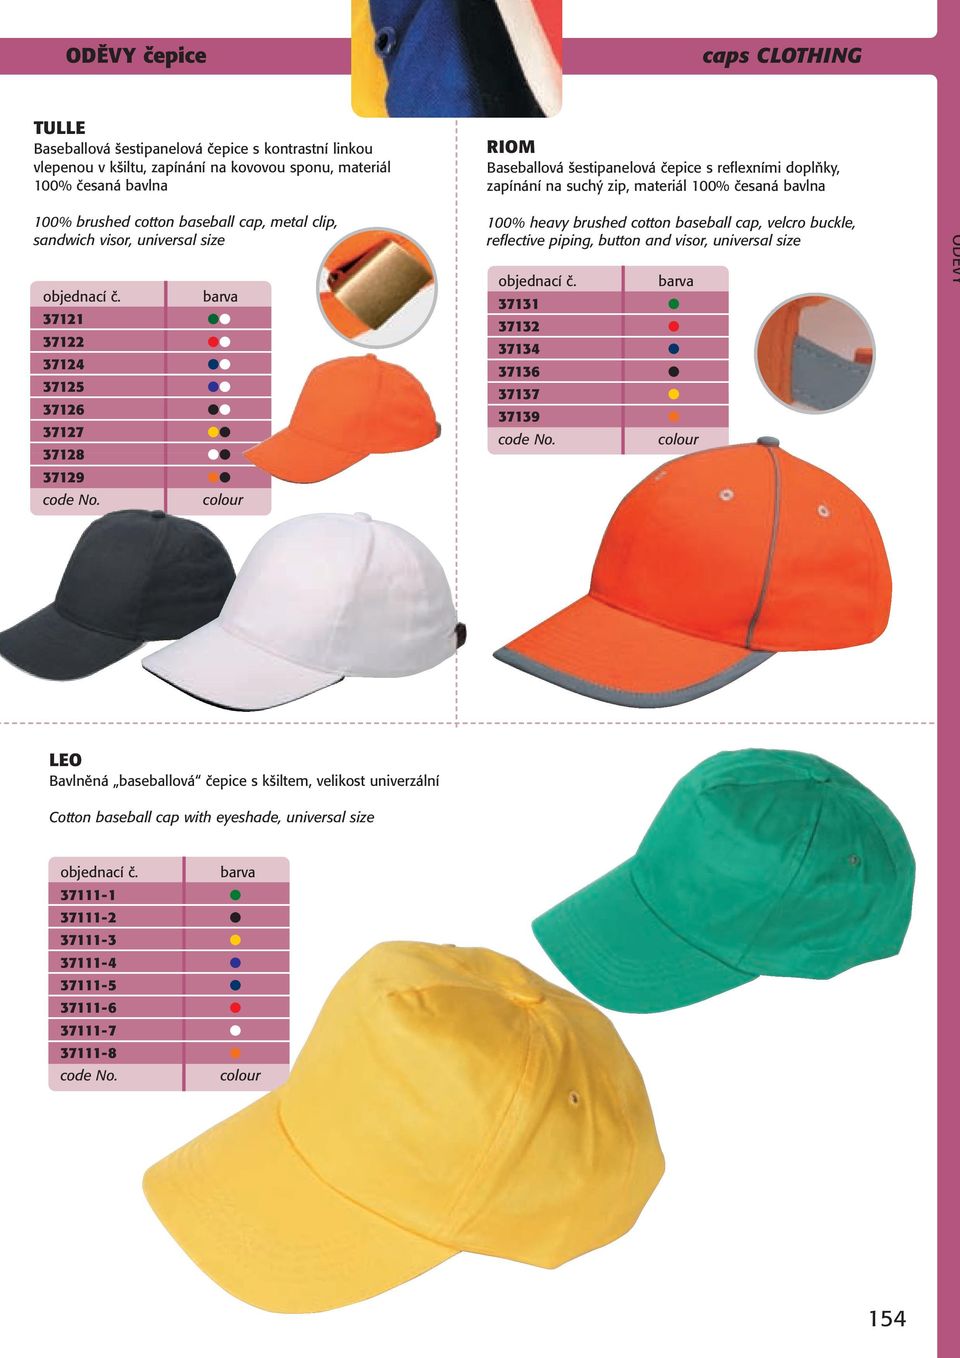 37122 37124 37125 37126 37127 37128 37129 100% heavy brushed cotton baseball cap, velcro buckle, reflective piping, button and visor, universal size 37131 37132 37134 37136 37137